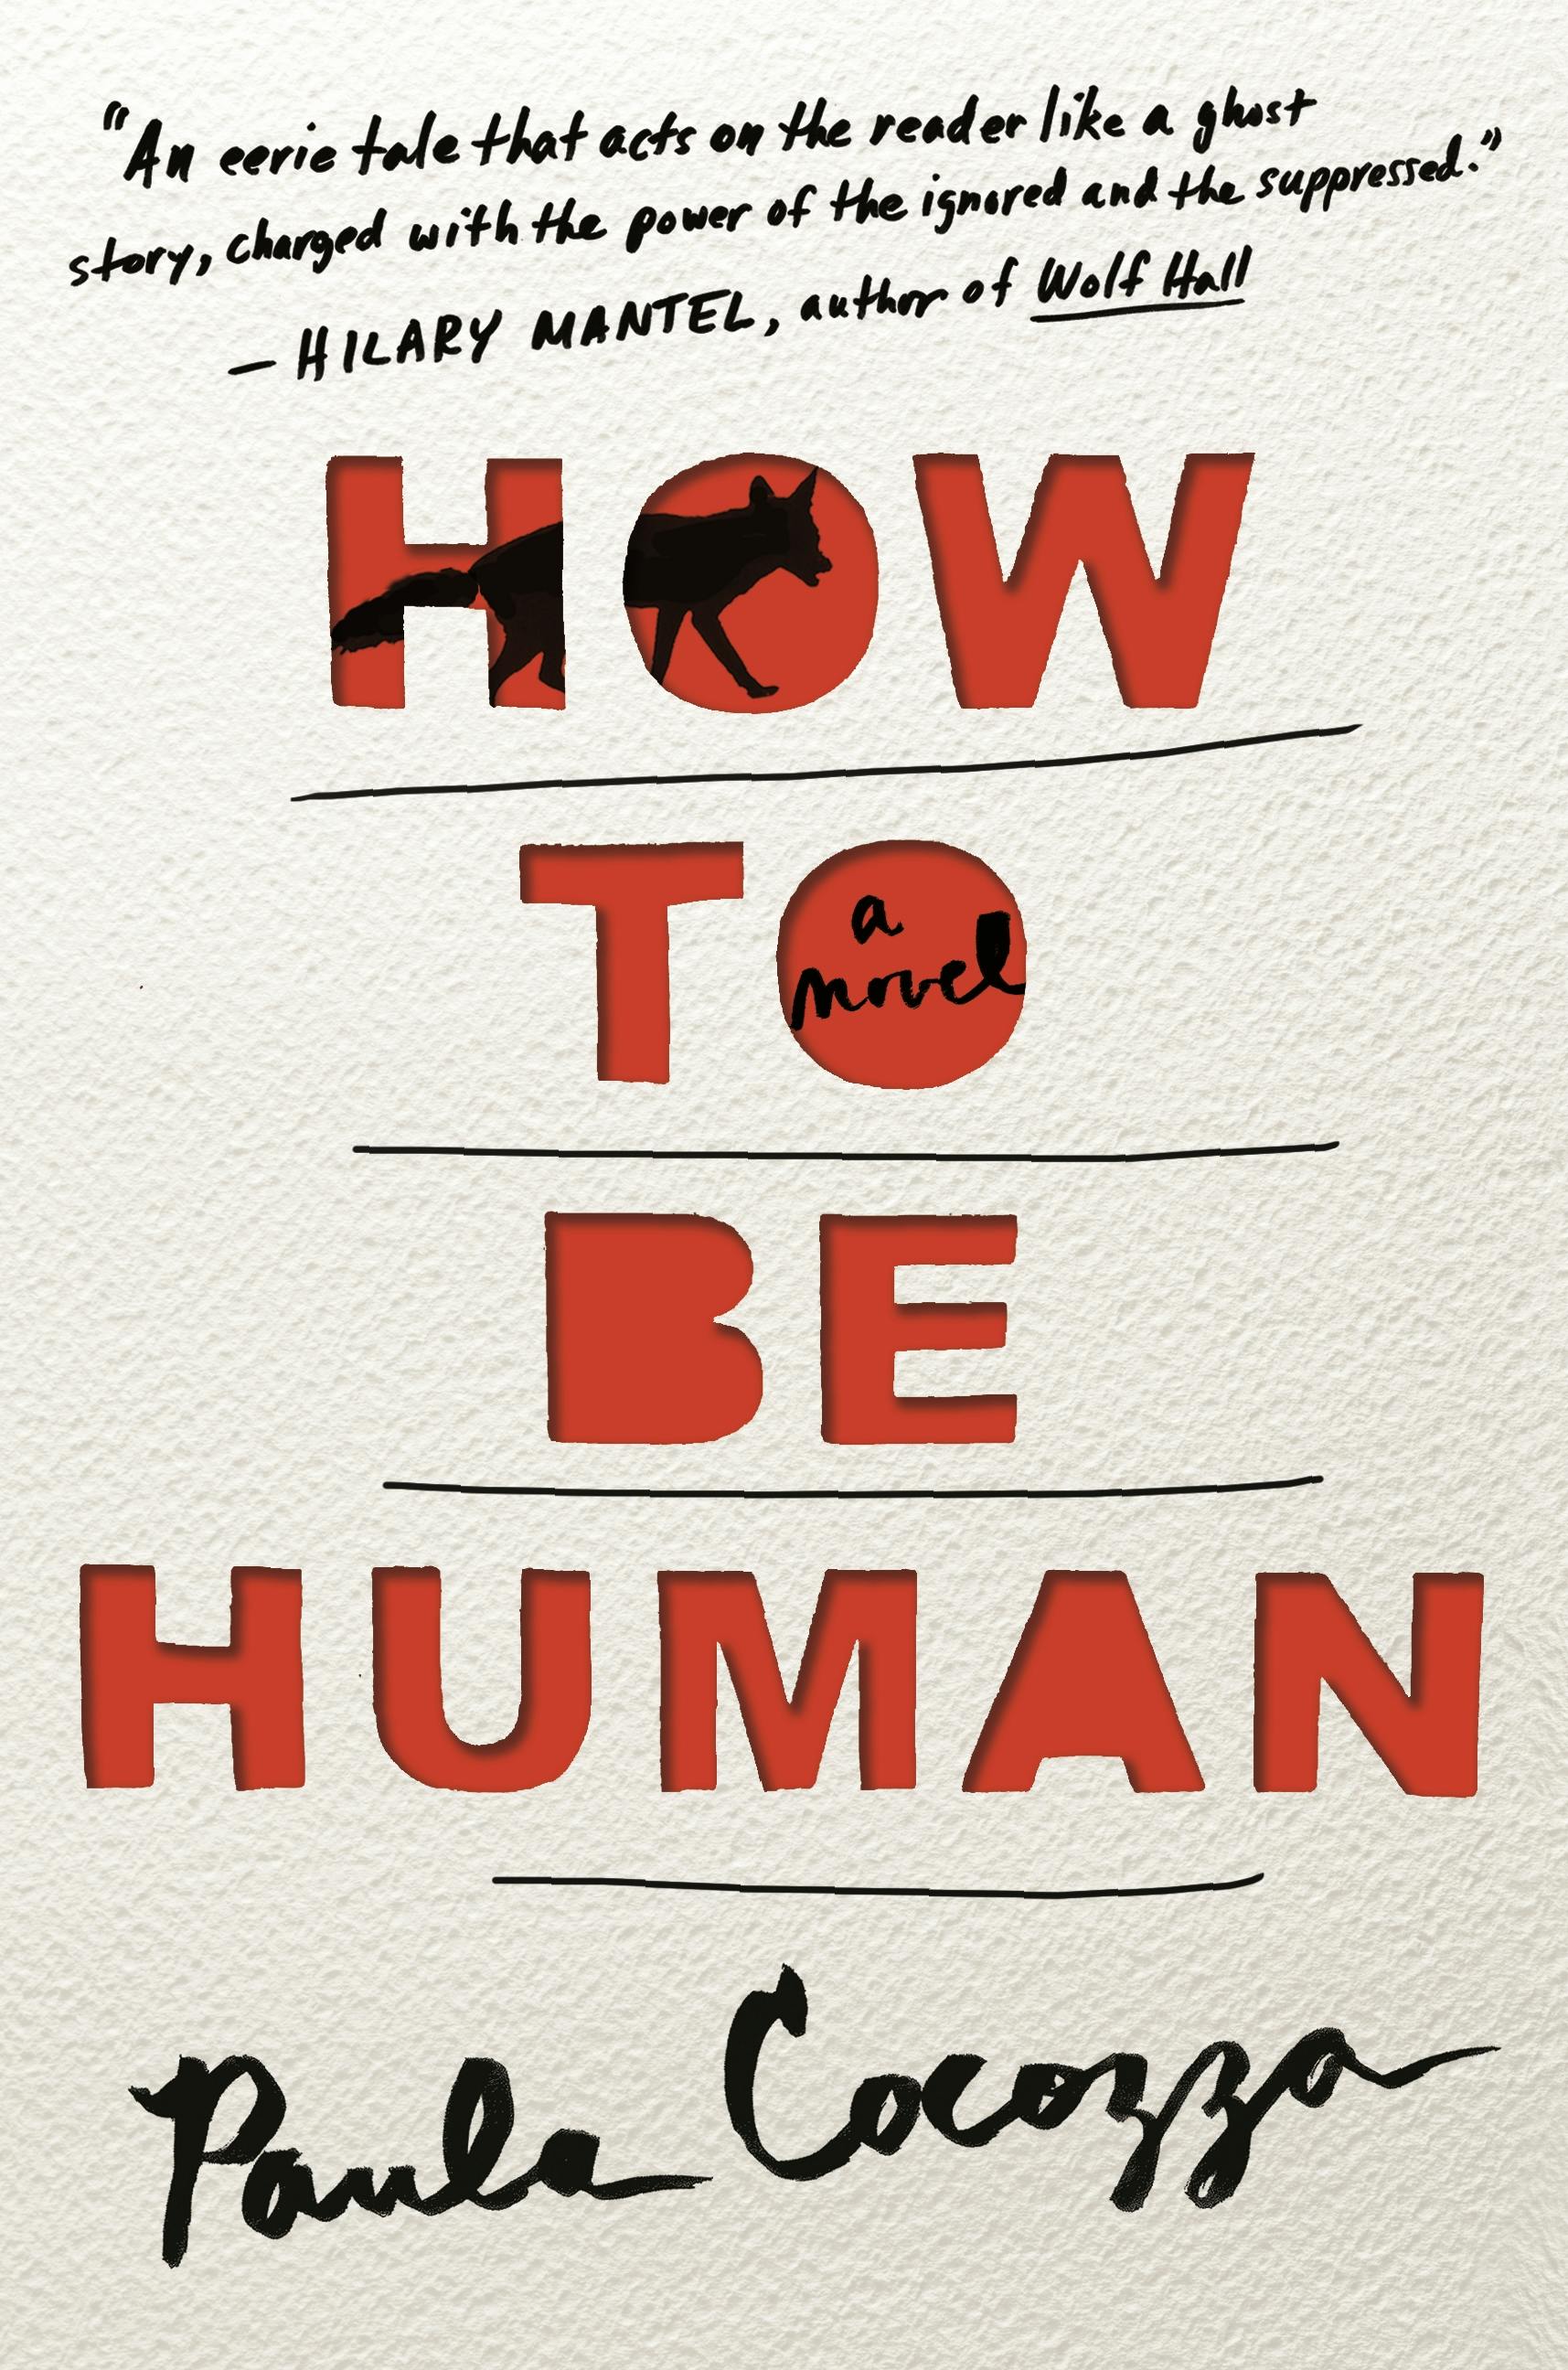 Be How Human to